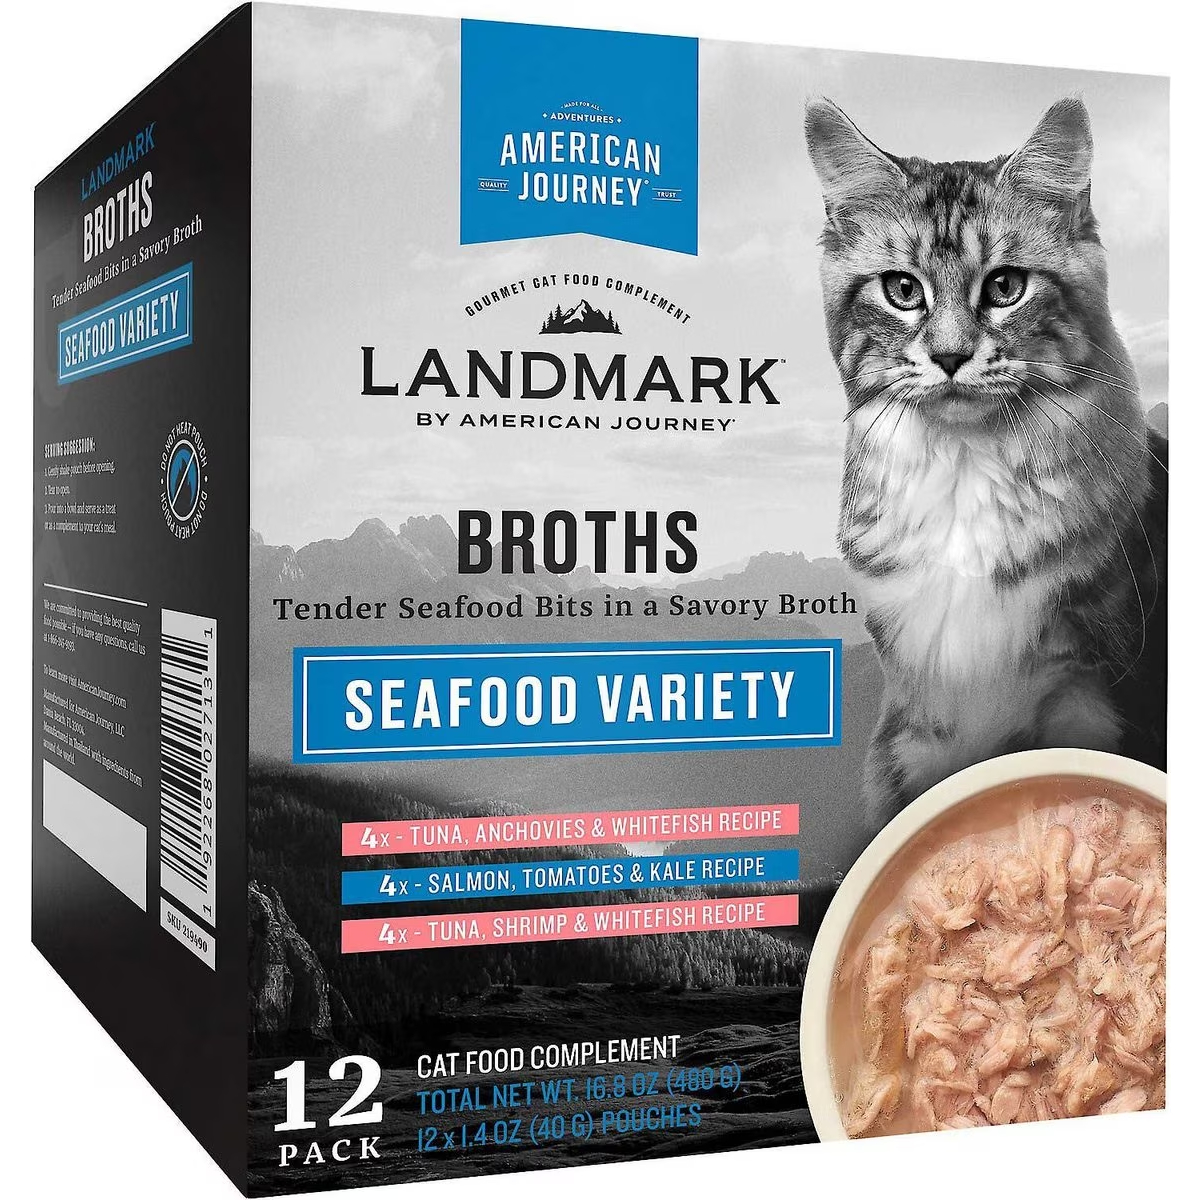 American Journey Landmark Broths Seafood Variety Pack Wet Cat Food Complement Pouches new